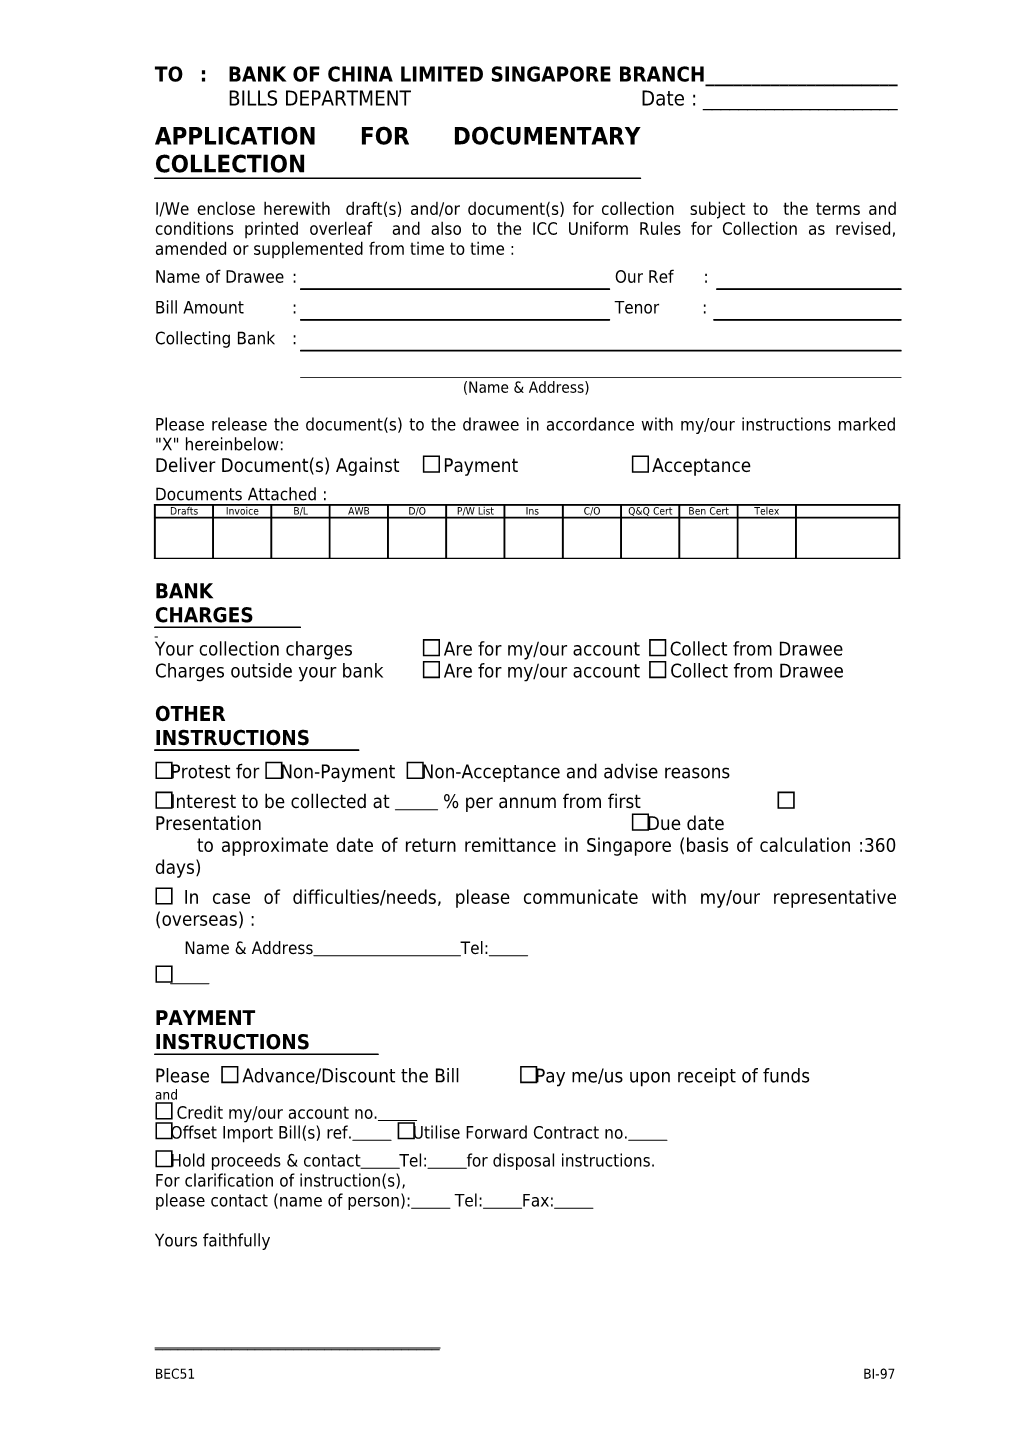 Application for Documentary Collection